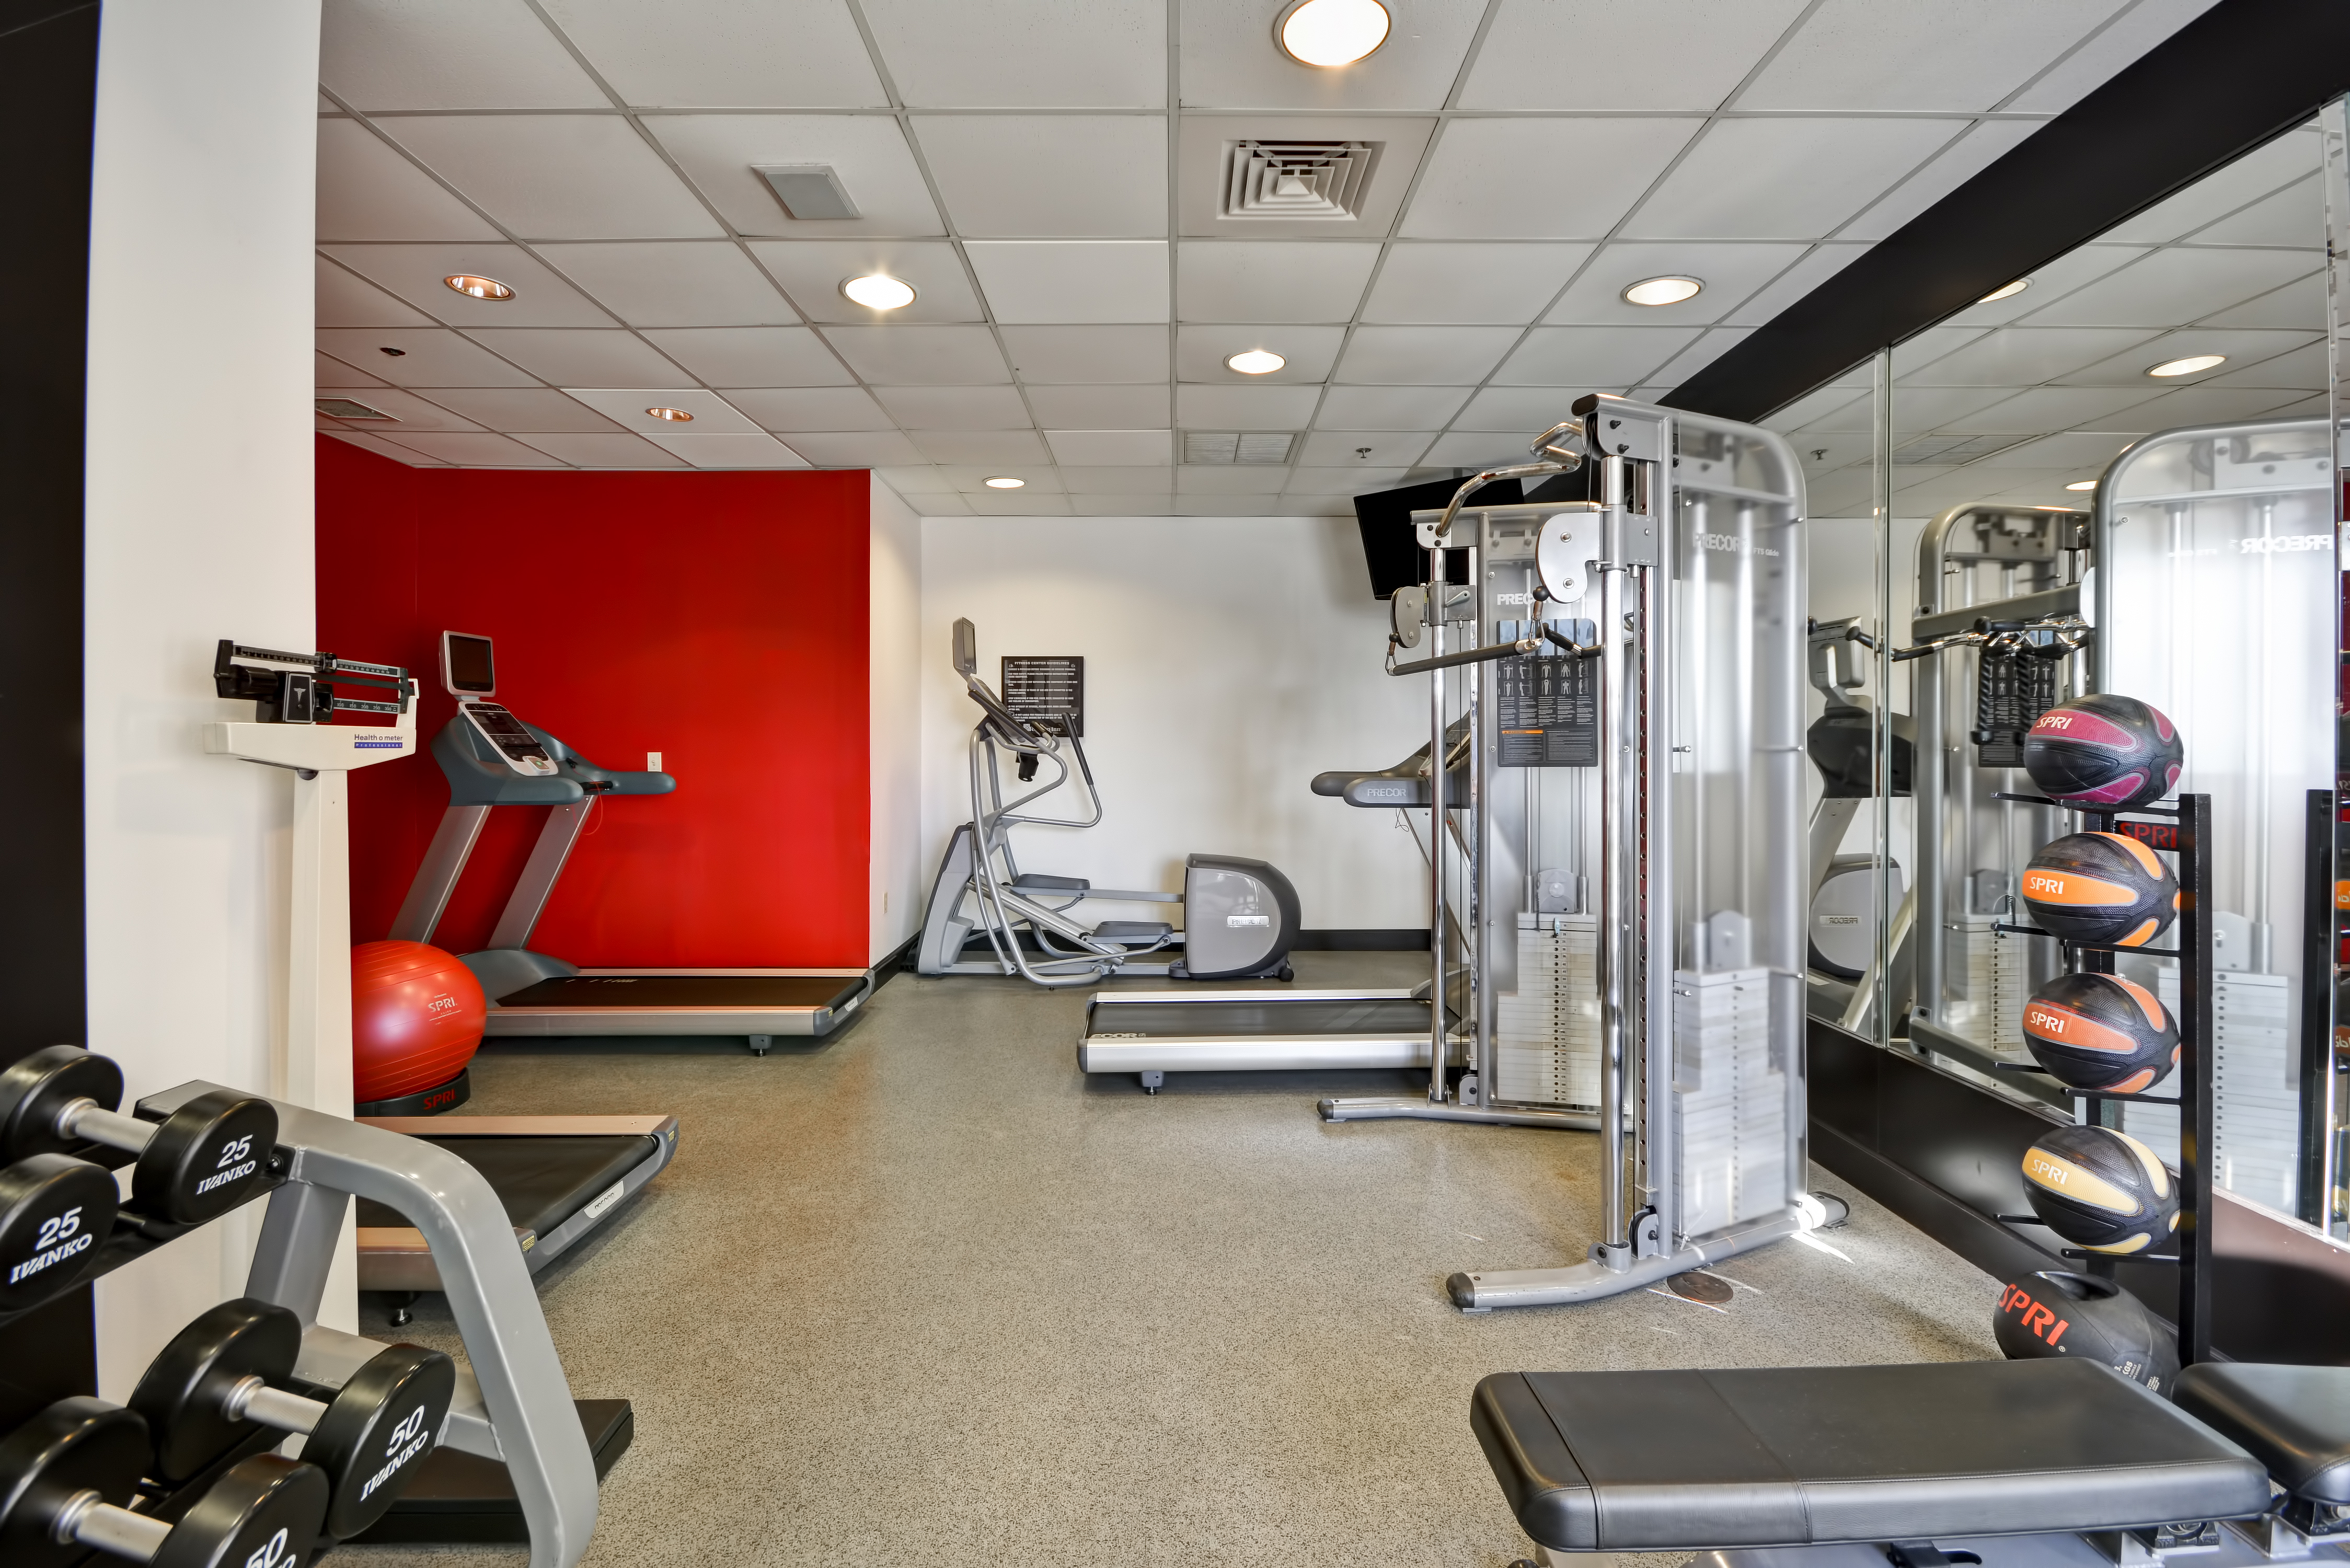 Fitness Center With Free Weights, Scale, Cardio Equipment, Red Stability Ball, Mirrored Wall, Weight Machine, Weight Balls, and Bench